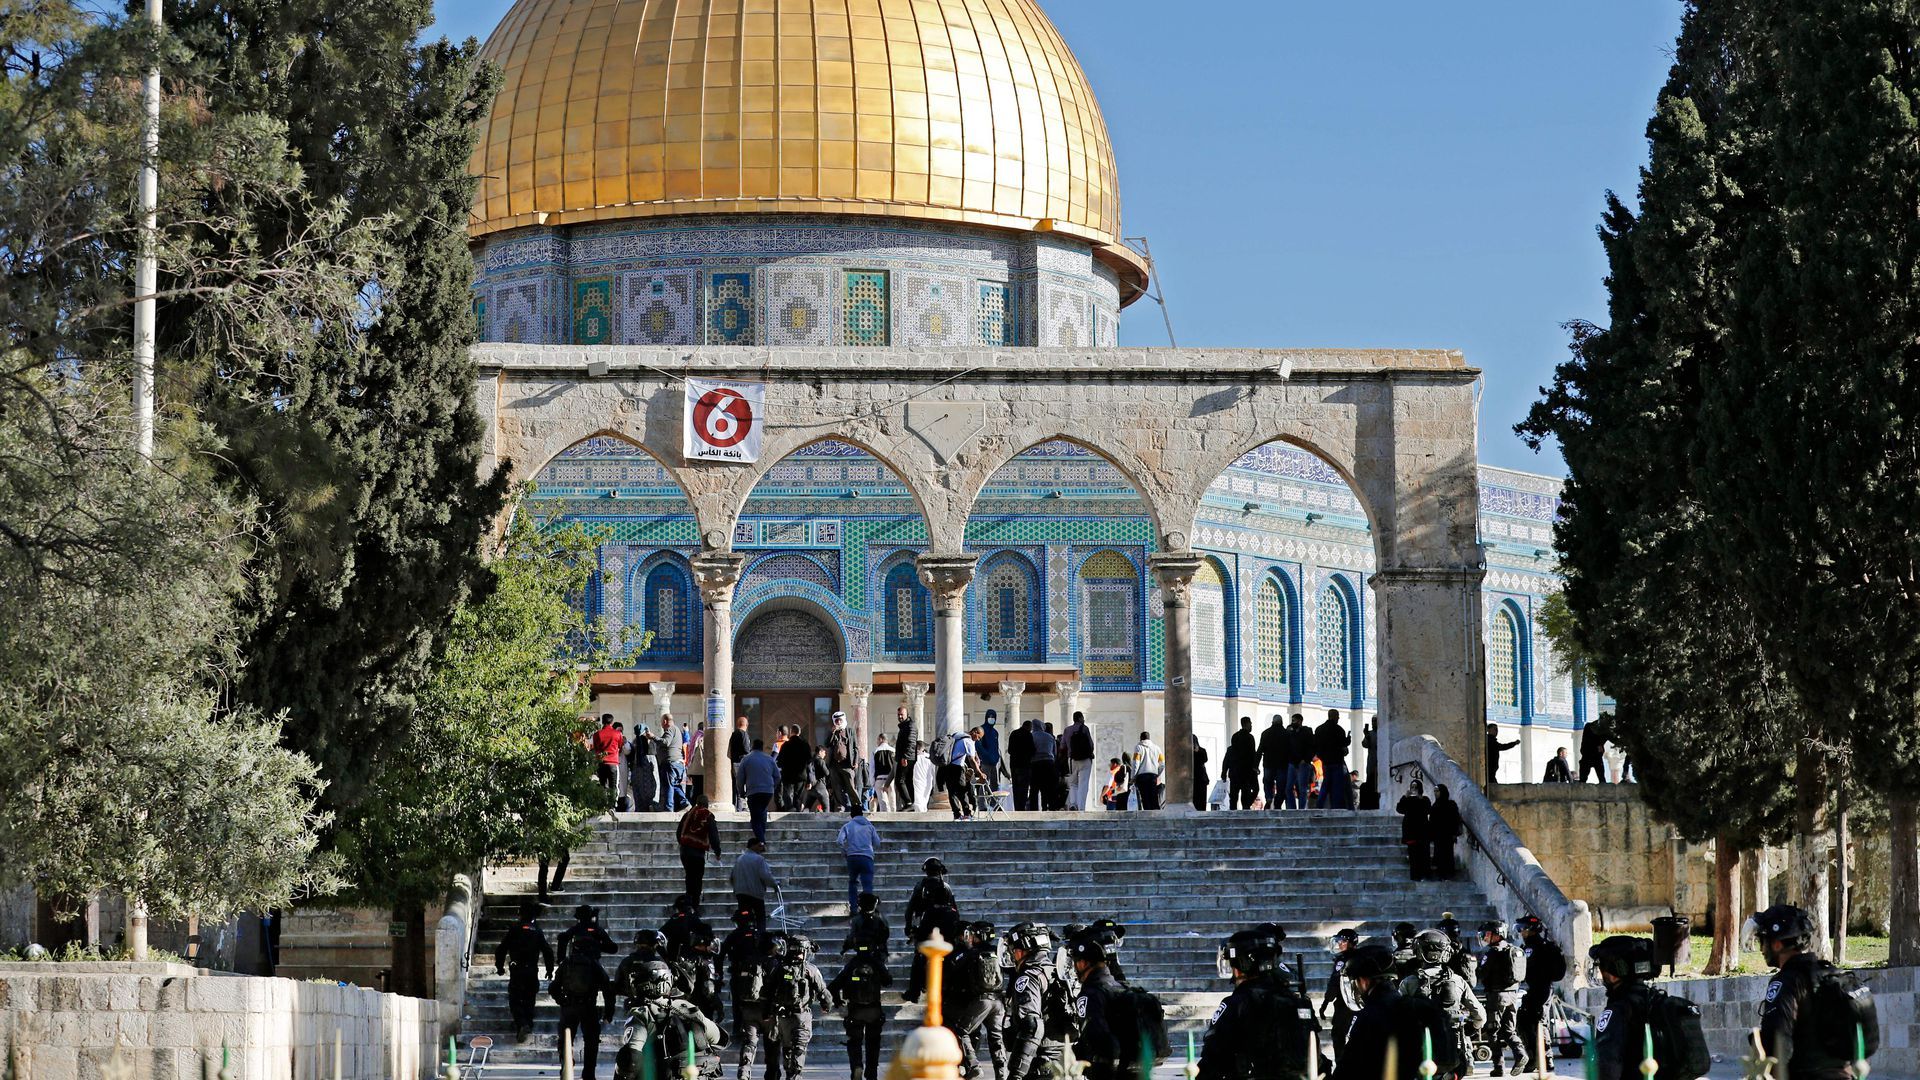 Israeli forces and Palestinians at the al-Aqsa compound on April 15. Photo: Ahmad Gharbli/AFP via Getty Images